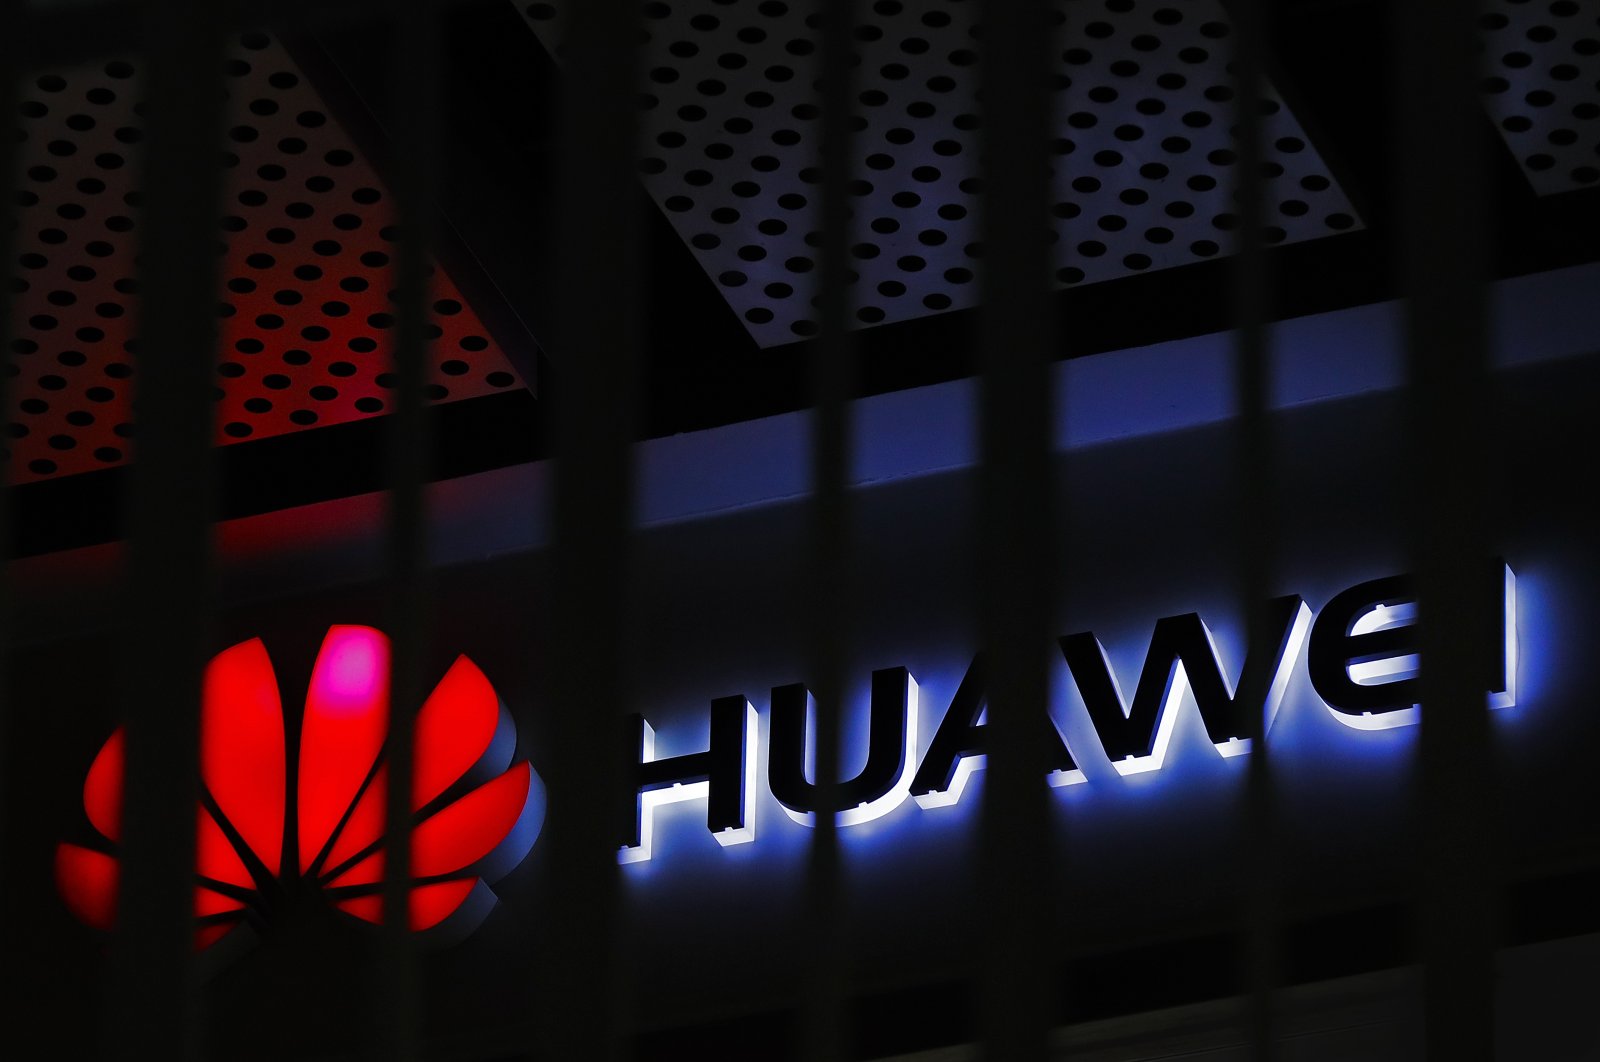 The logo of a Huawei retail shop is seen through a handrail inside a commercial office building in Beijing, China, March 8, 2019. (AP Photo)